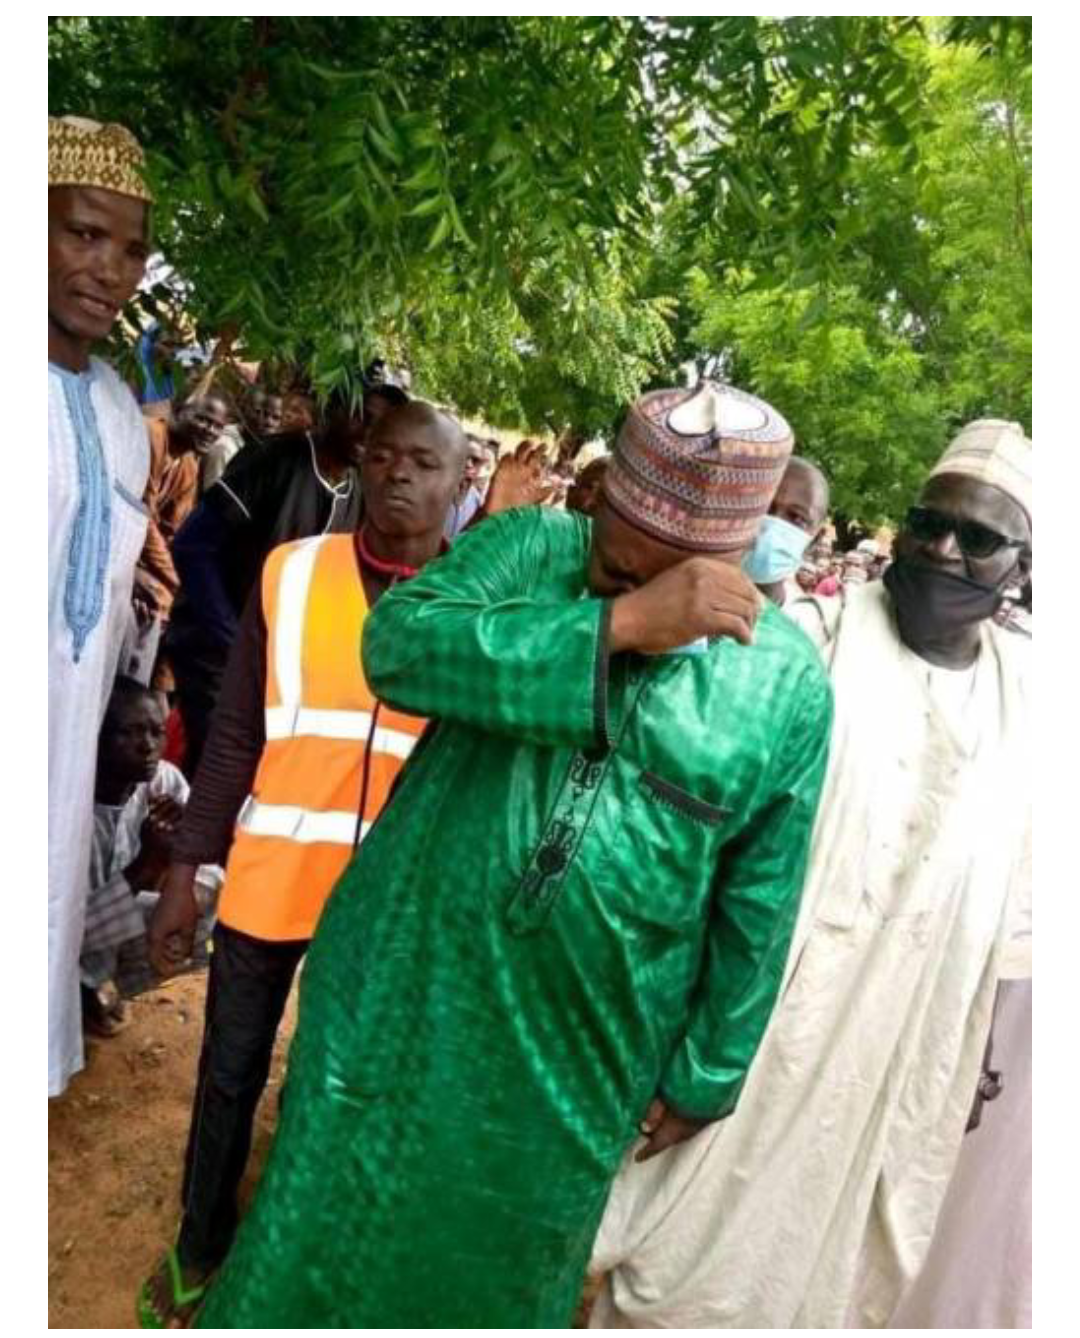 » Sokoto Lawmaker Cries On Seeing Thousands Of Constituents In Refugee Camps In Niger